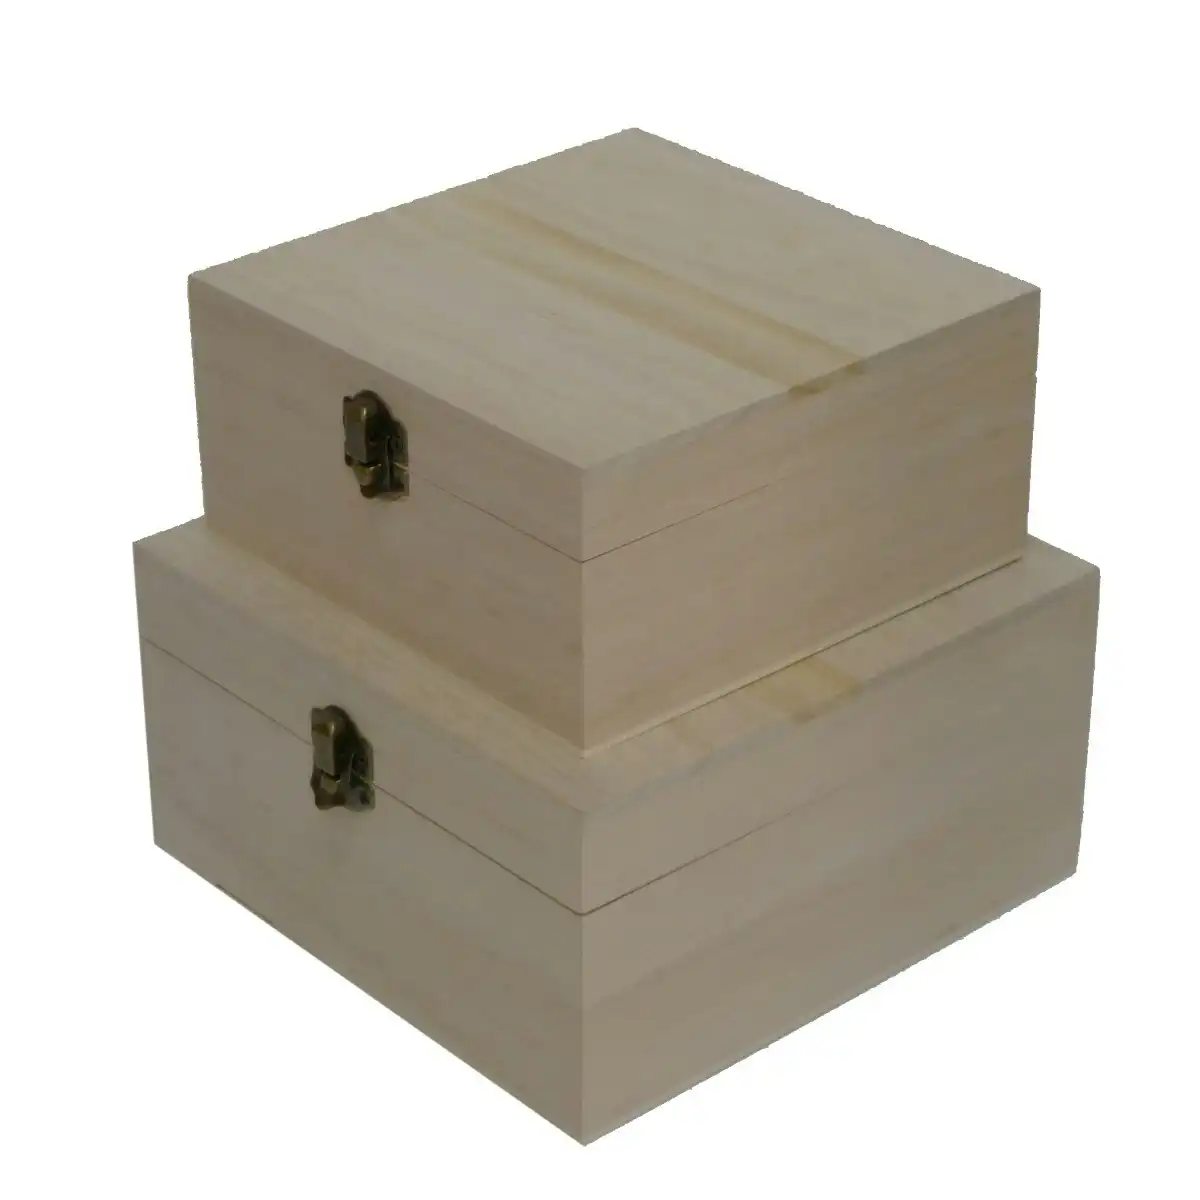 2pc Boyle Craftwood Large/Small Square Storage Box w/ Catch Organiser/Container